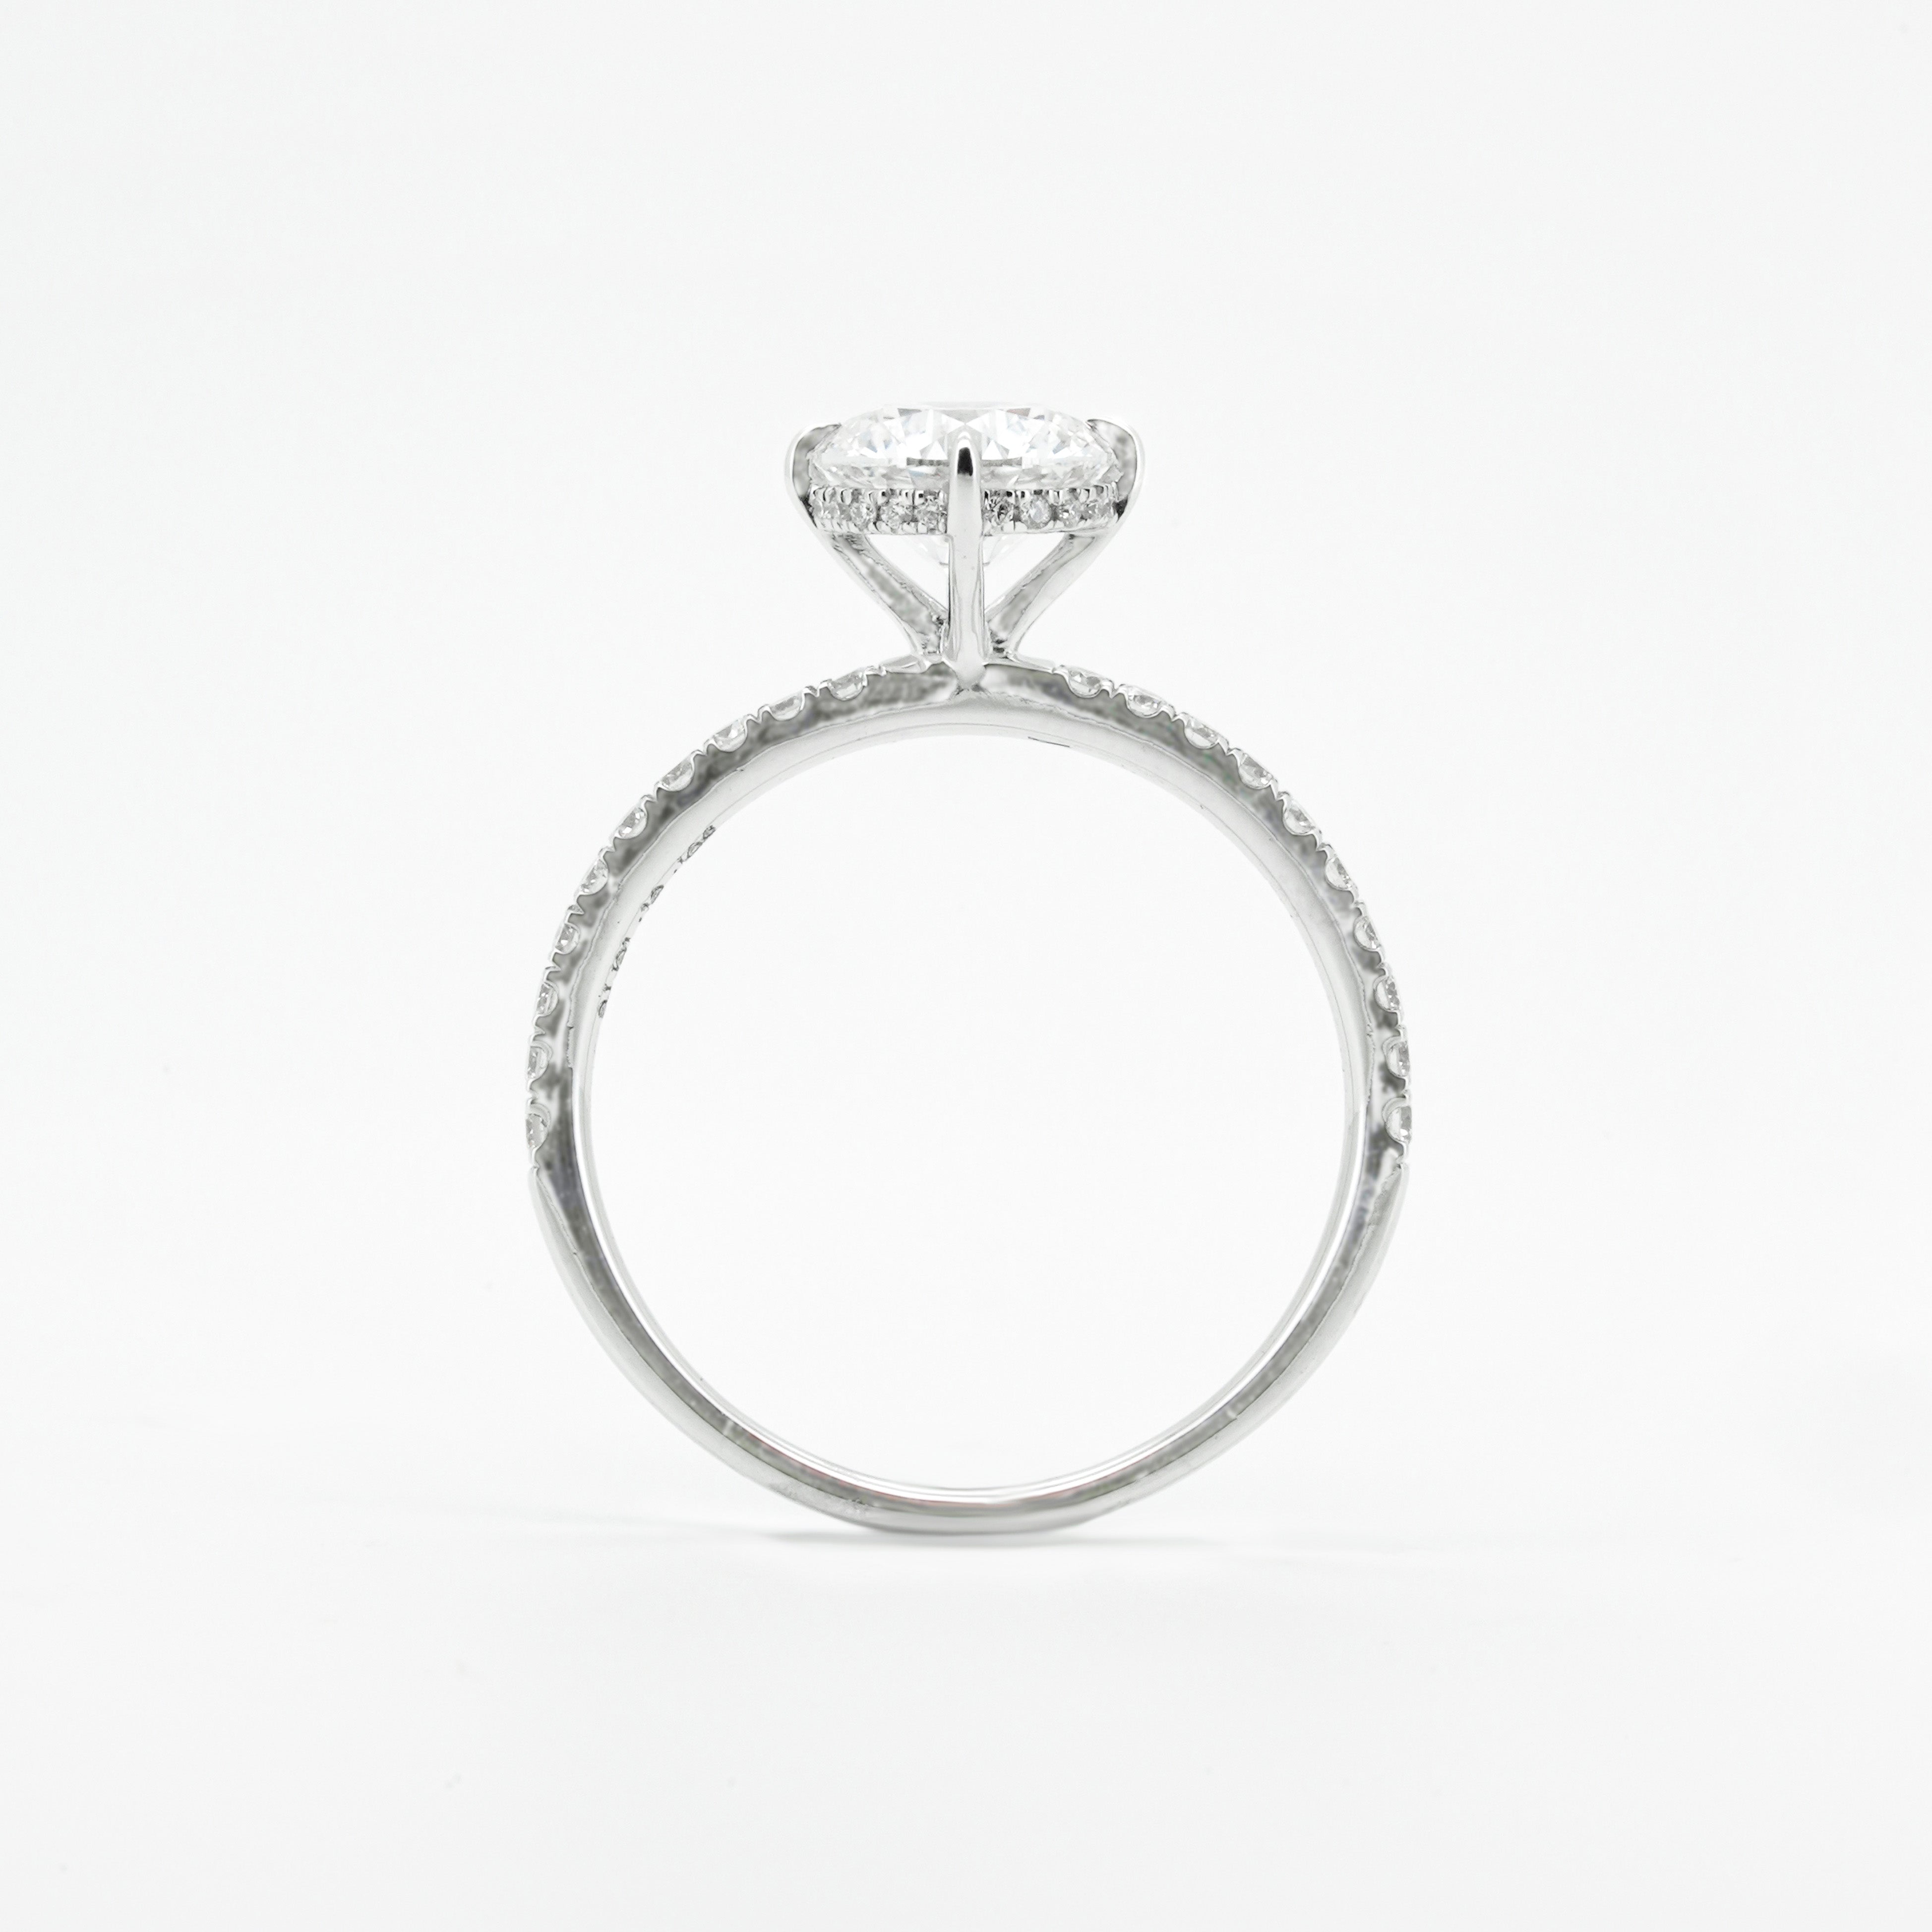 Round Diamond with 4 prong and Pave Diamond | Sol et Terre